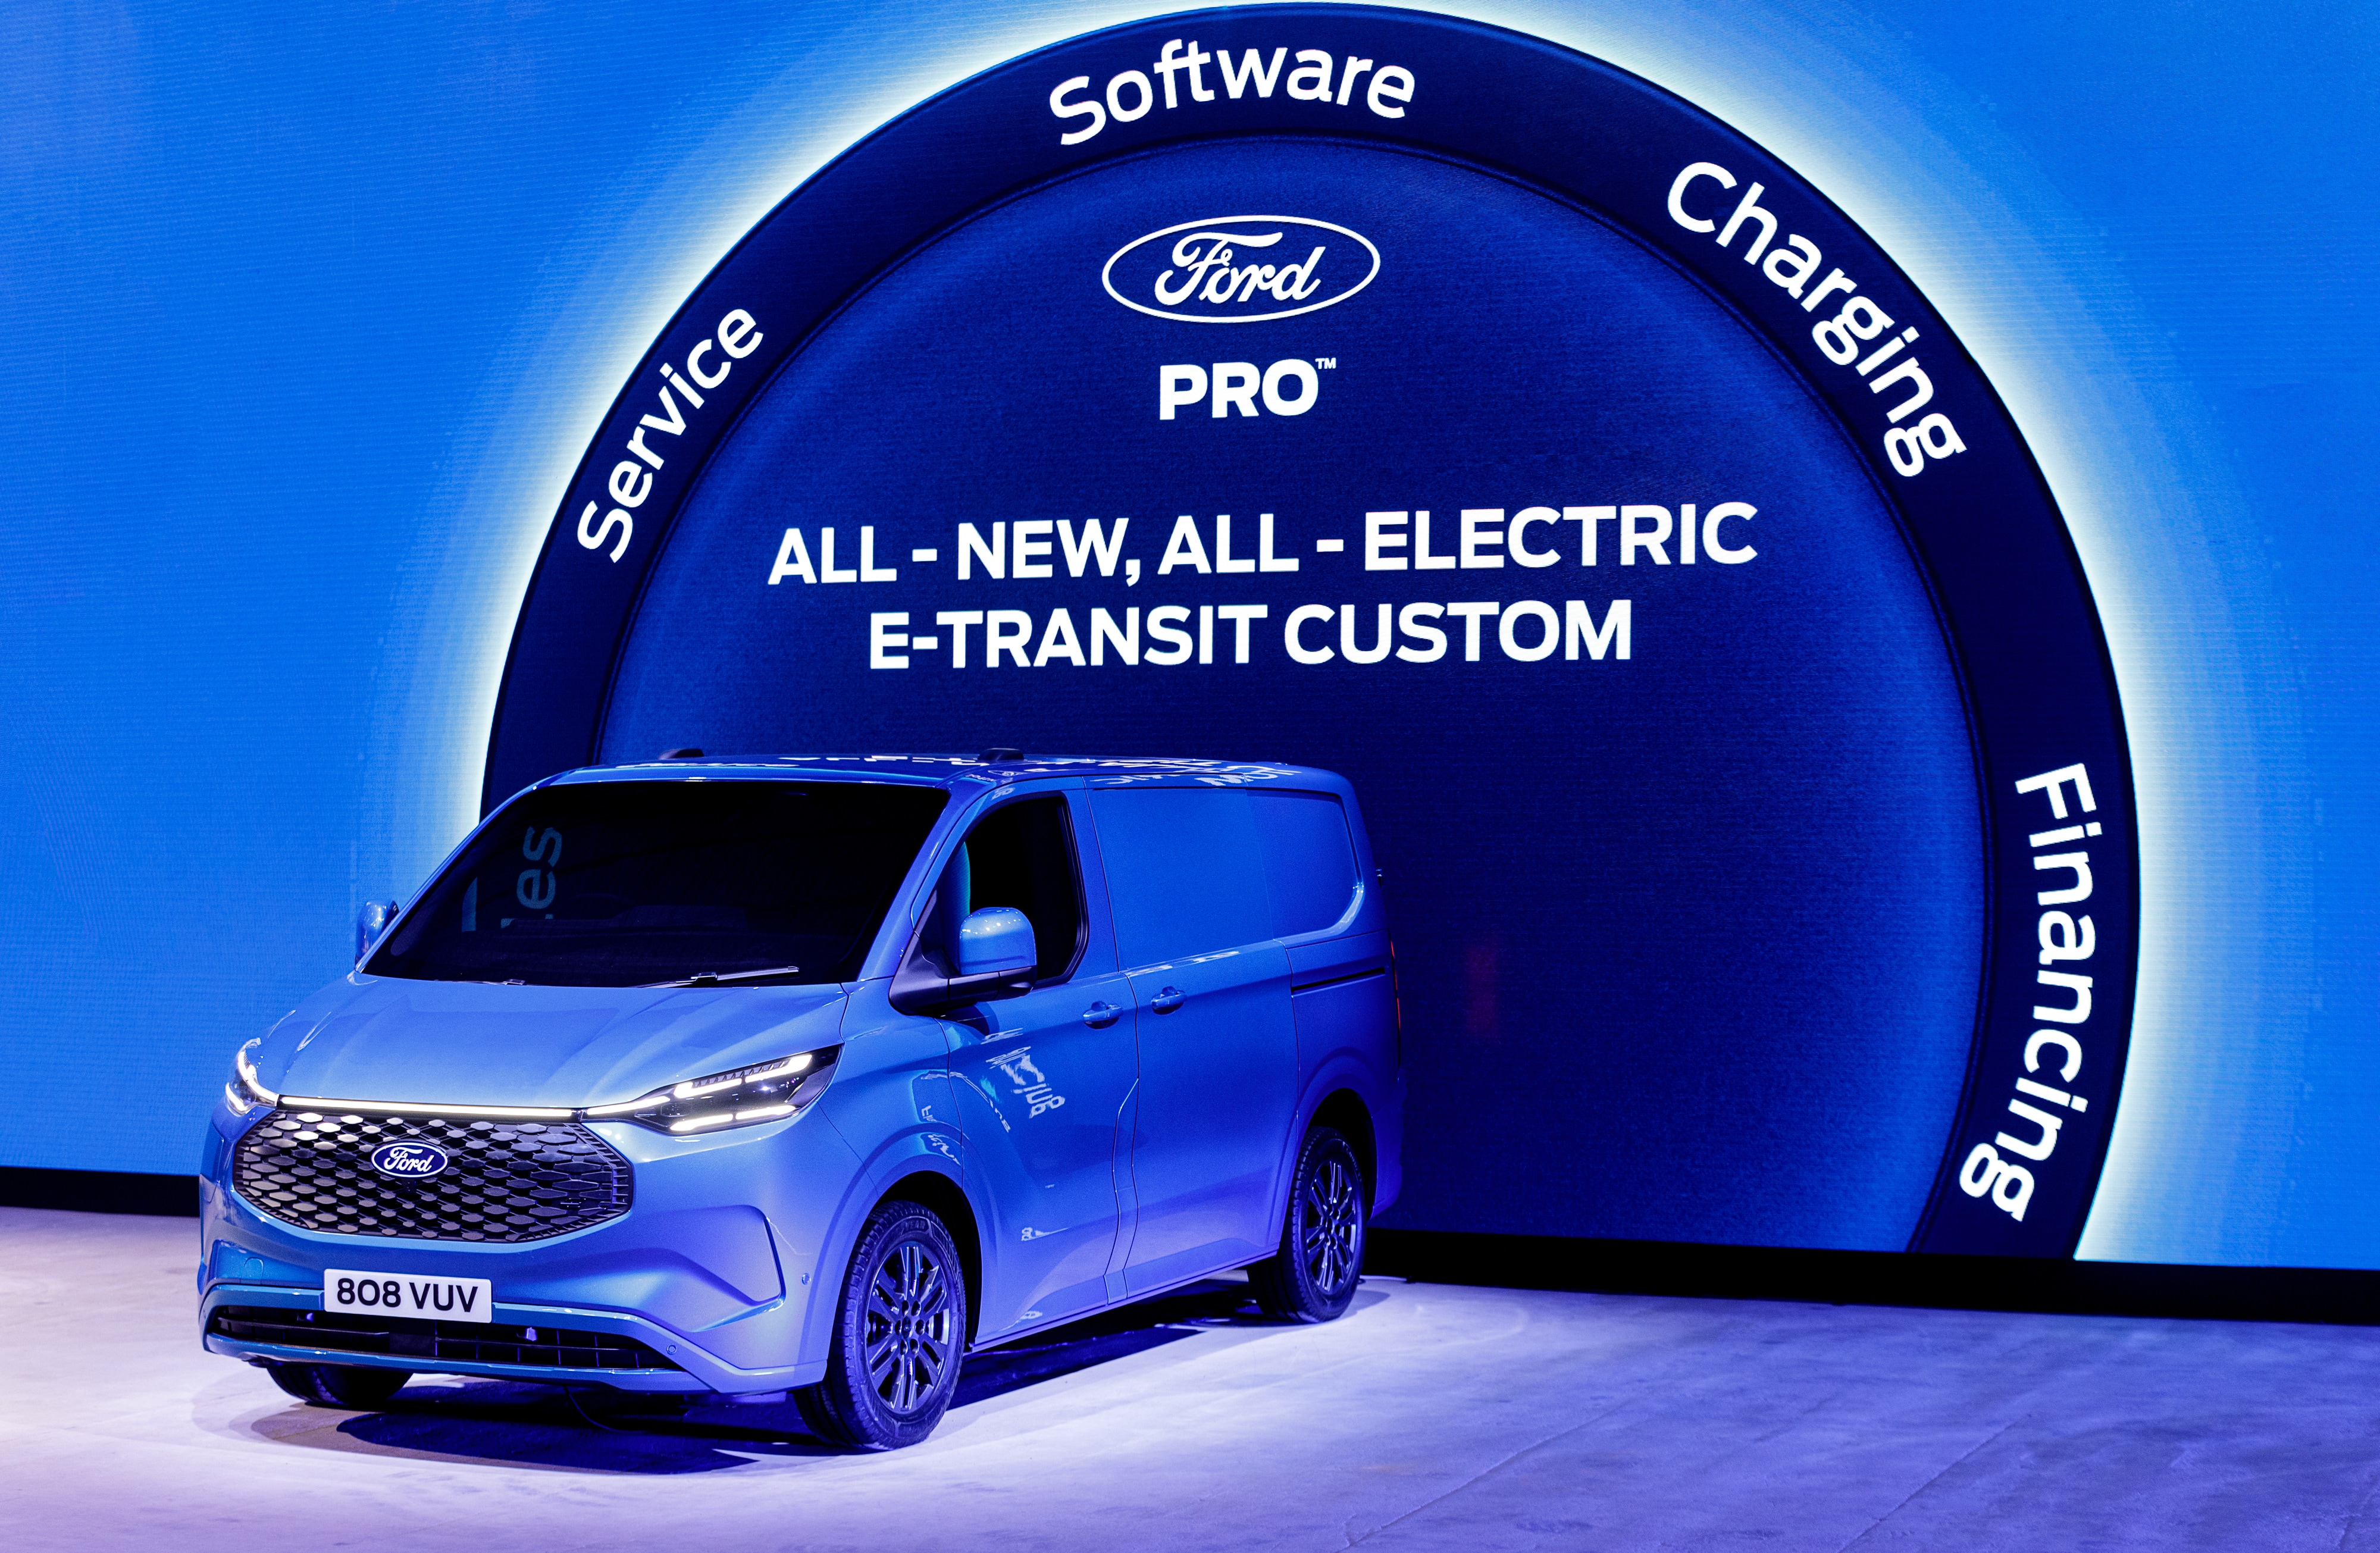 All-New, All-Electric E-Transit Custom from Ford Pro is Set to Spark the EV  Revolution for Small Businesses, Ford of Europe